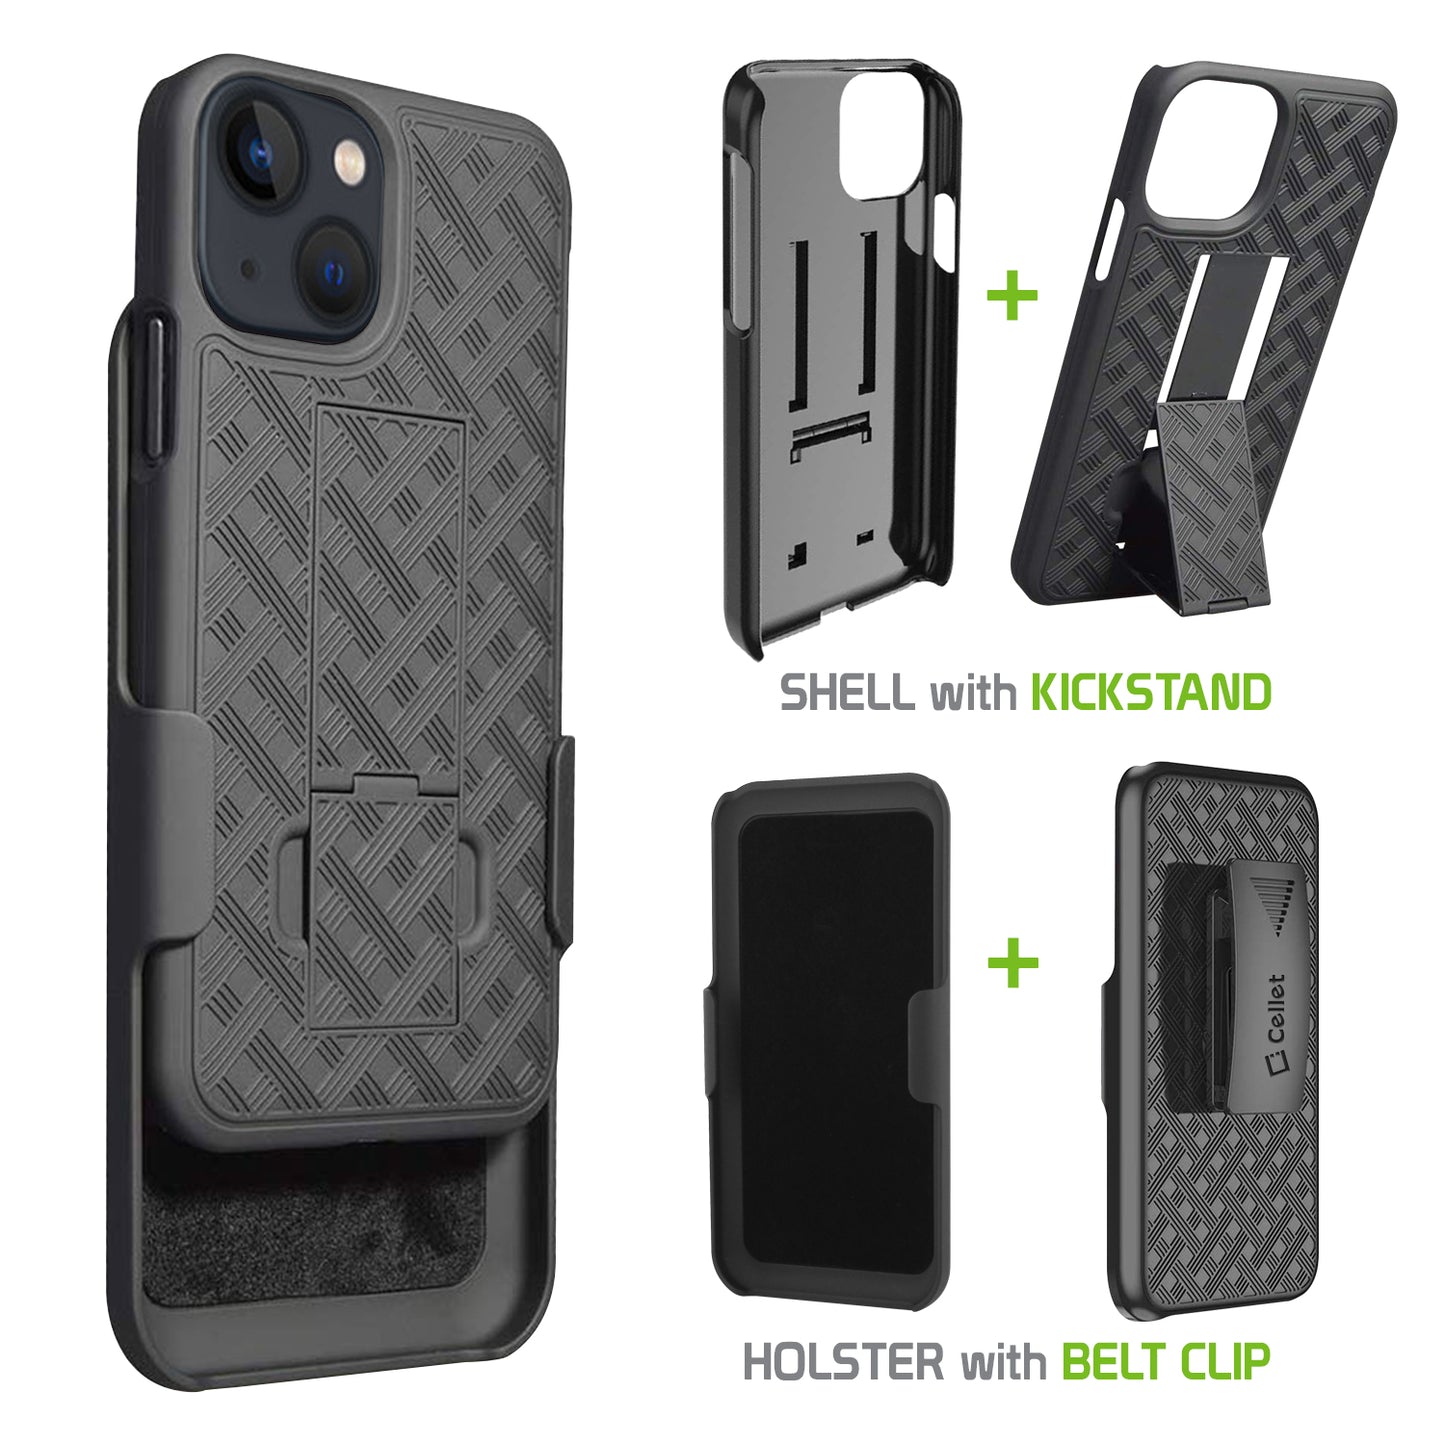 HLIPH13MINI-iPhone 13 mini Holster, Shell Holster Kickstand Case with Spring Belt Clip for Apple iPhone 13 mini – Black – by Cellet